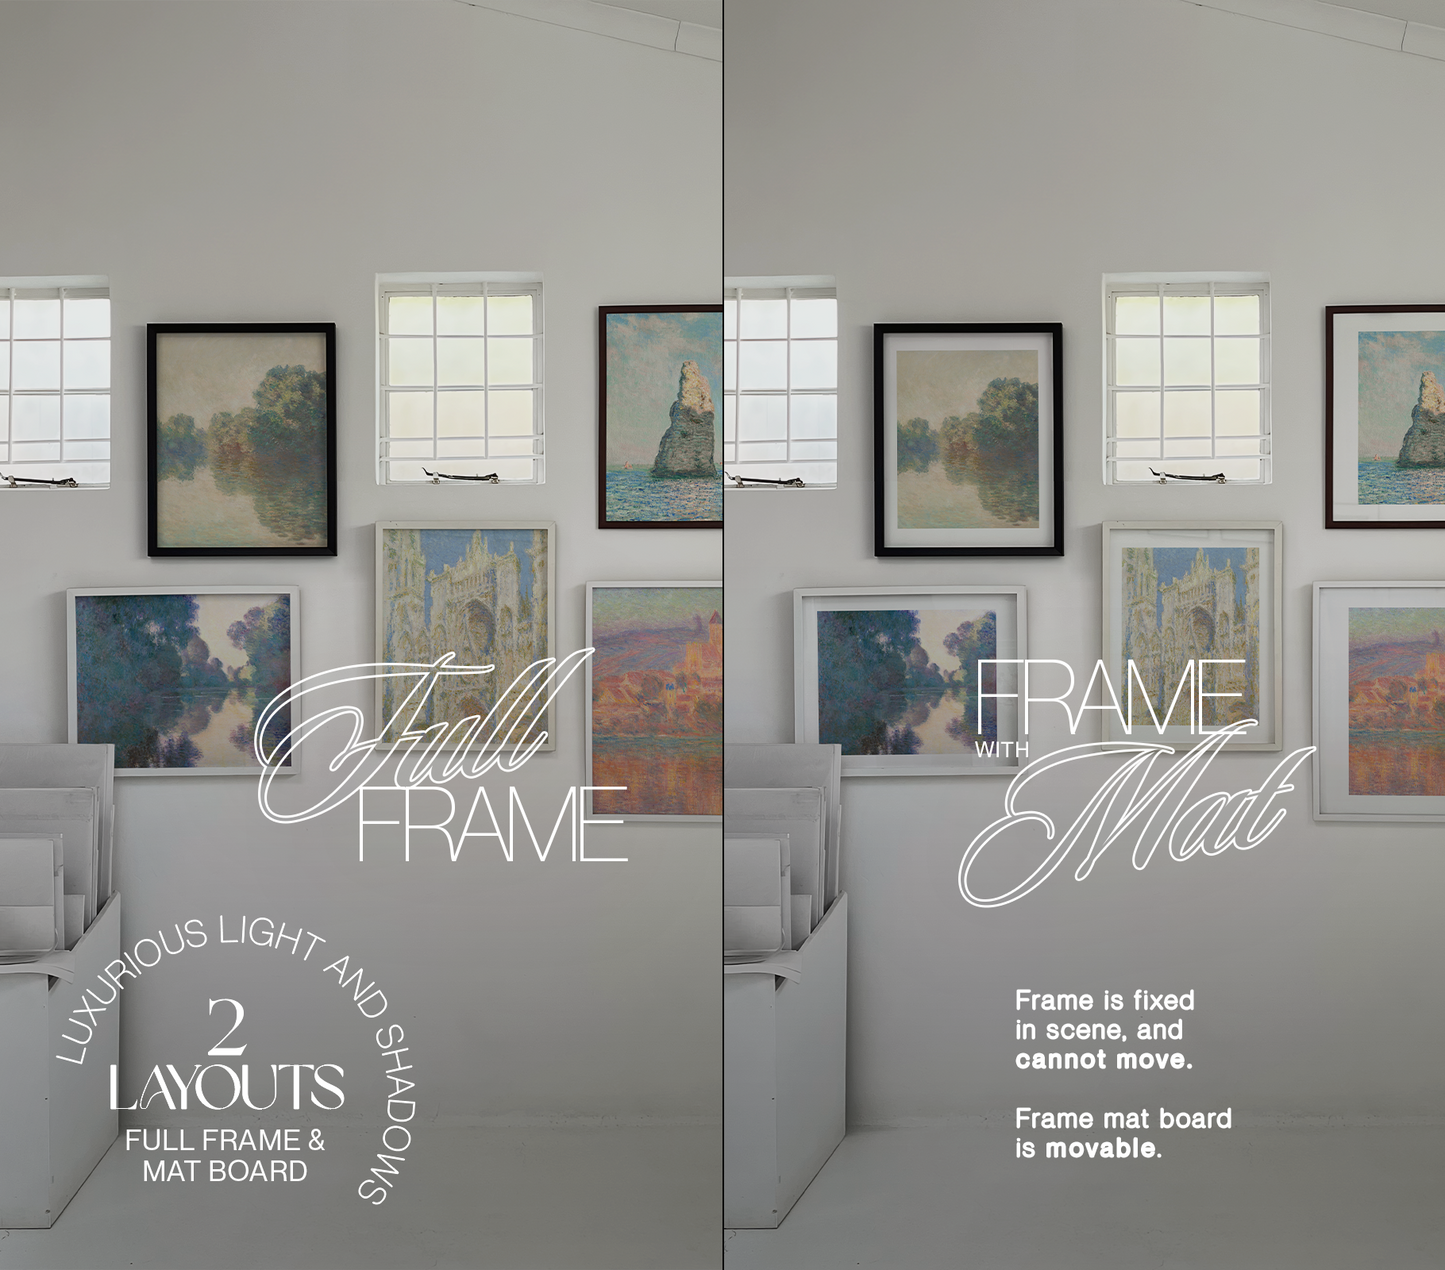 DIN A and 4x5 Frames Gallery Wall Mockup